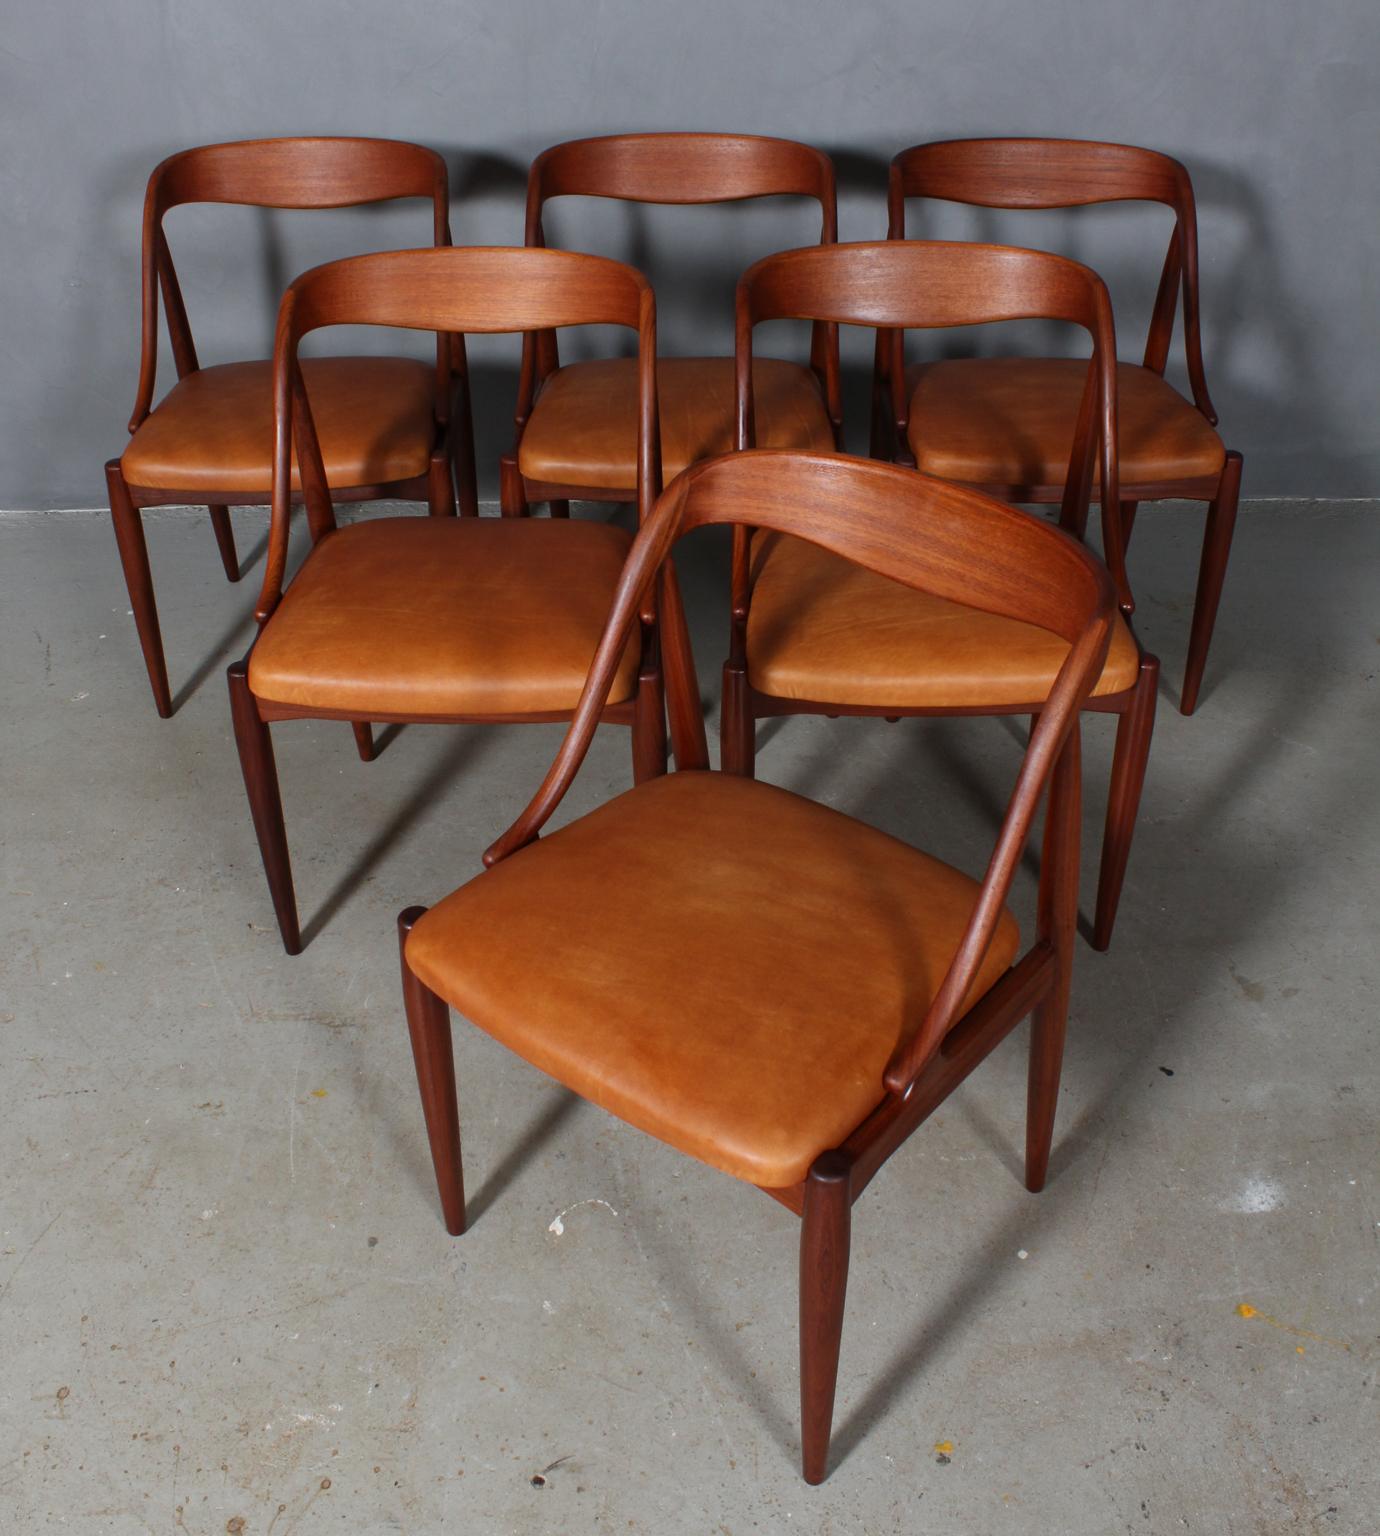 Johannes Andersen six dining chairs in solid oiled teak.

New upholstered with vintage tan aniline leather.

Model 16, made by Uldum Møbelfabrik.